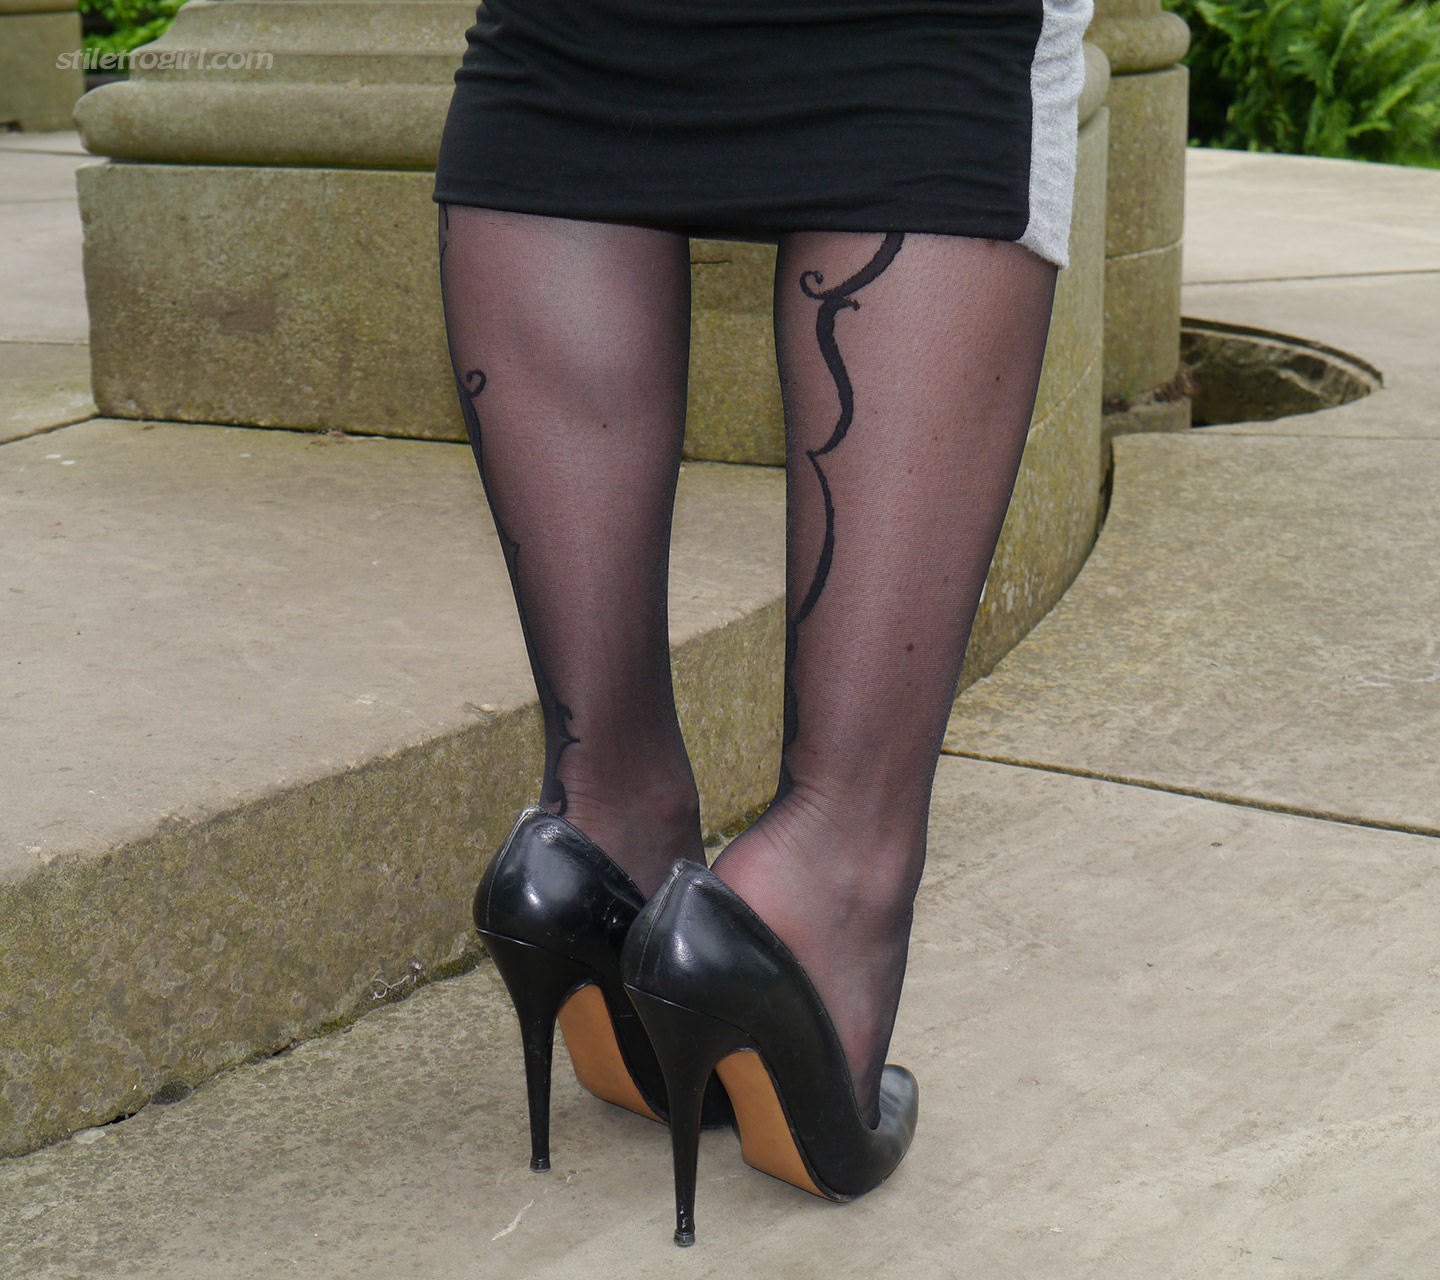 High Heels and Black Pantyhose by Stiletto Girl